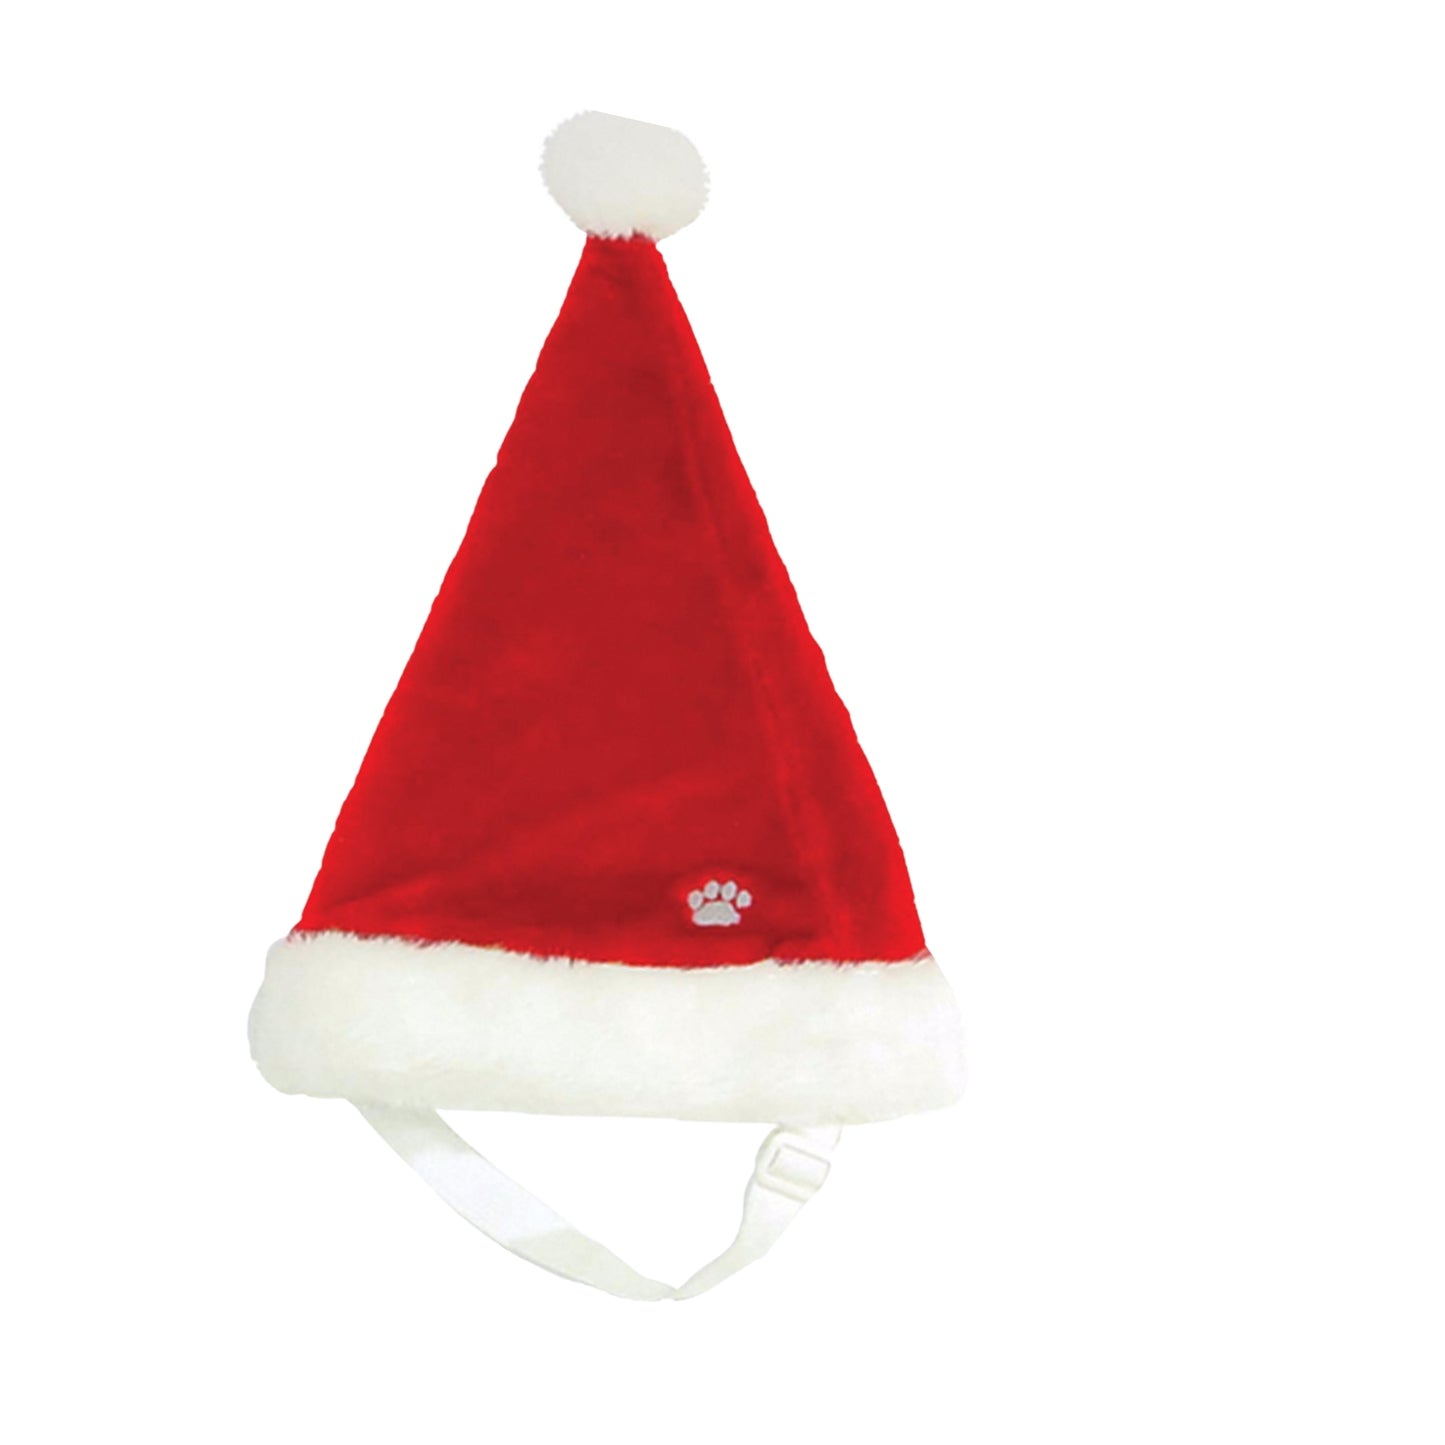 Outward Hound Kyjen  30036 Dog Santa Hat Holiday and Christmas Pet Accessory, Large, Red